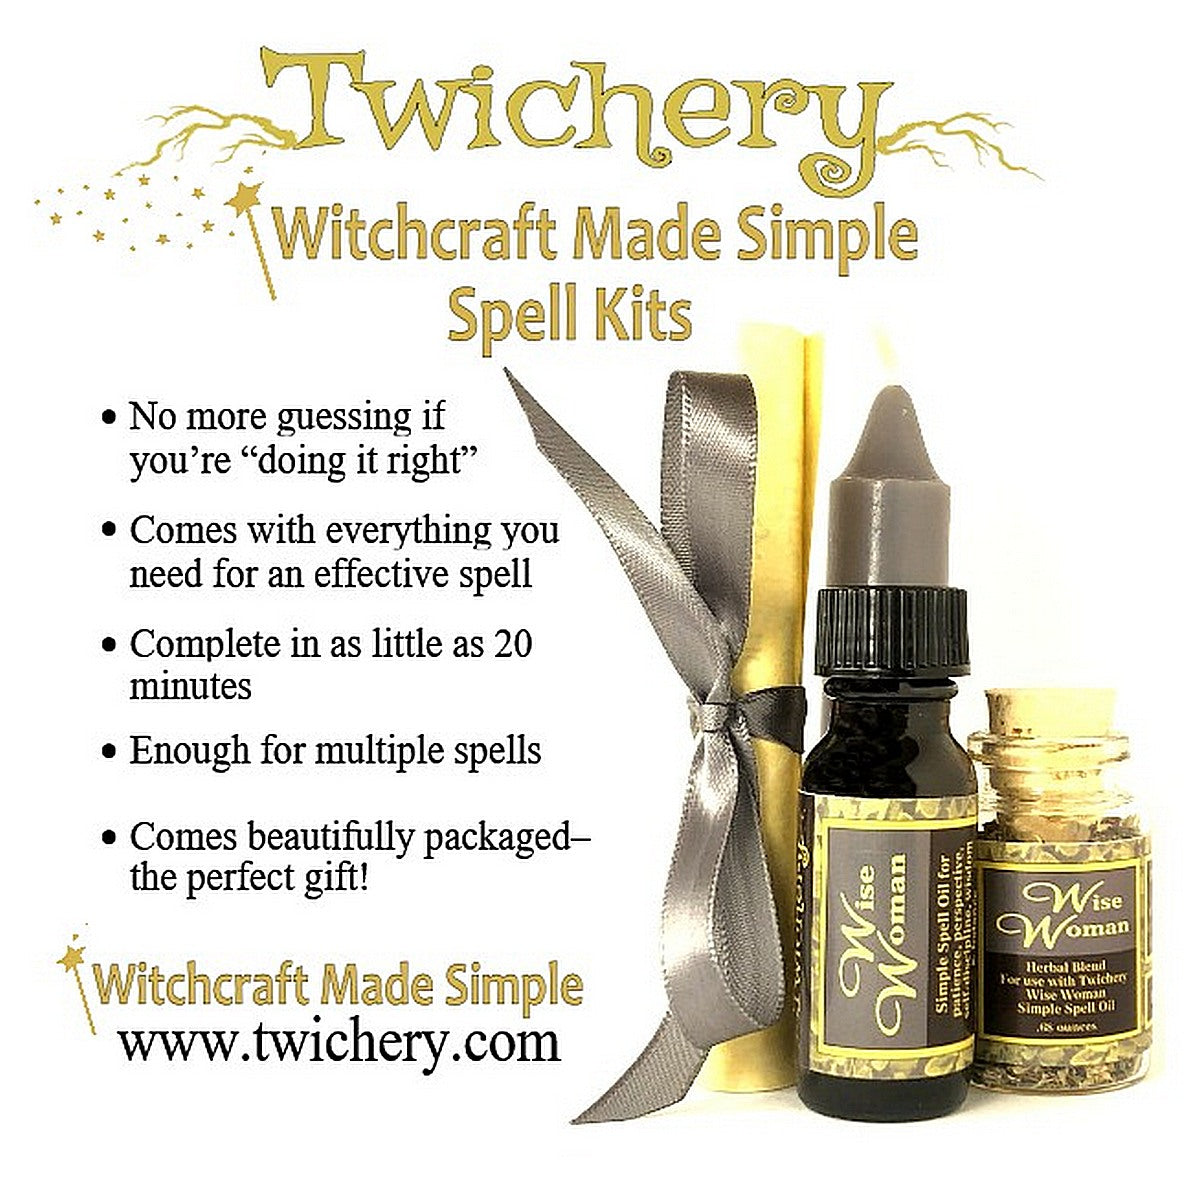 Twichery Wise Woman Simple Spell Kit for maturity, wisdom beyond your years, perspective Hoodoo Voodoo Wicca Pagan